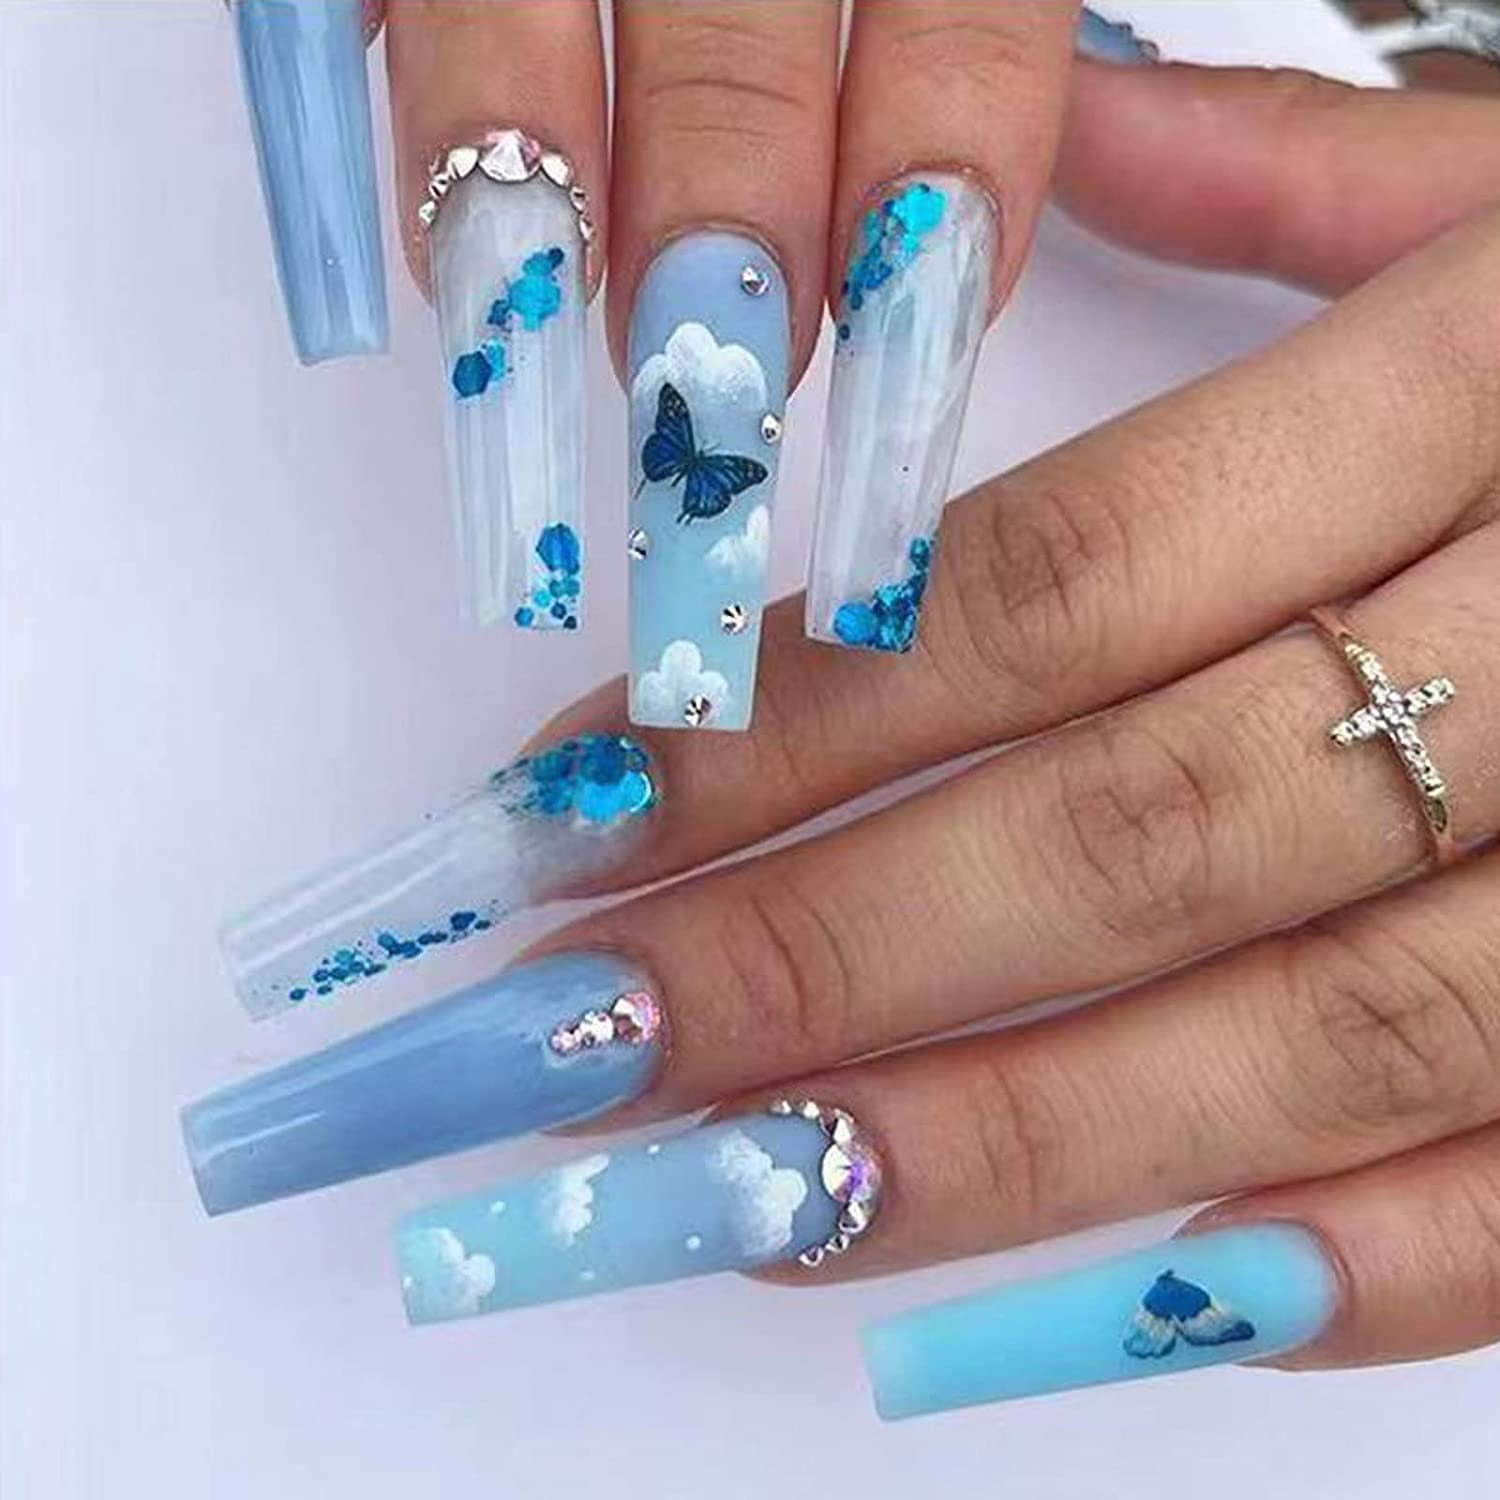 24 pcs Coffin Press on Nails Long Fake Nails Blue Glossy Glue on Nails Glitter Ballerina Acrylic Nails Butterfly Pattern False Nails with 3D Rhinestone Designs - Walmart.com